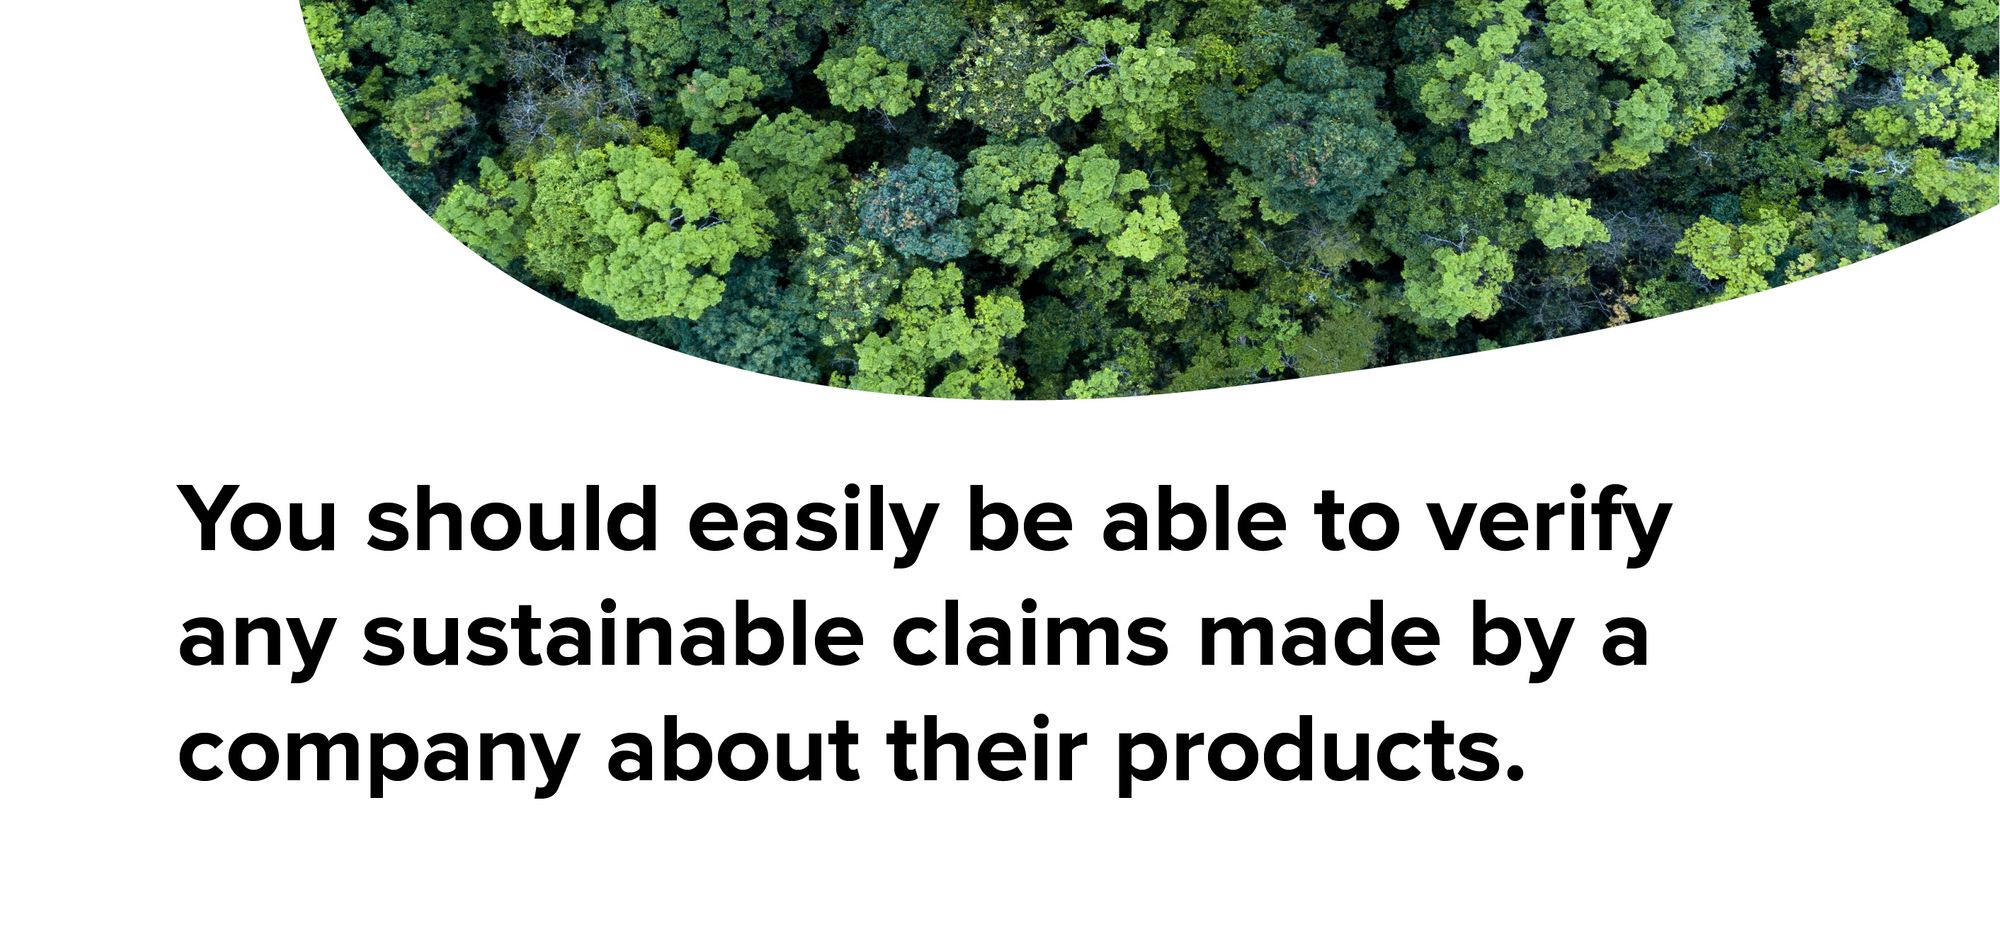 You should easily be able to verify any sustainability claims made by a company about their products.